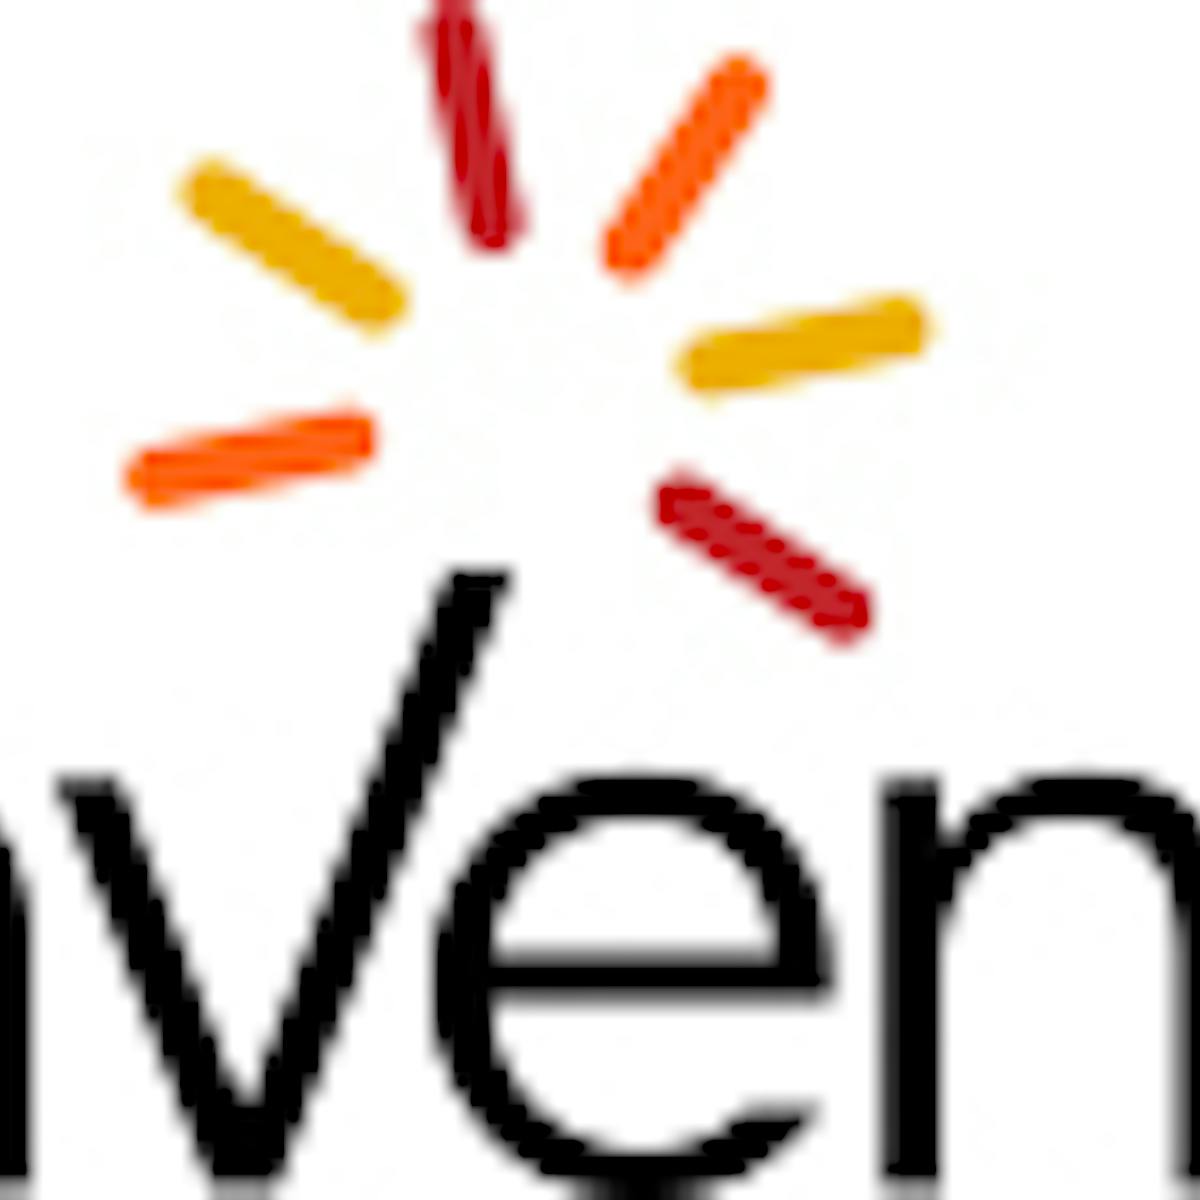 nVent unveils smart row, rack-level precision liquid cooling systems for data centers